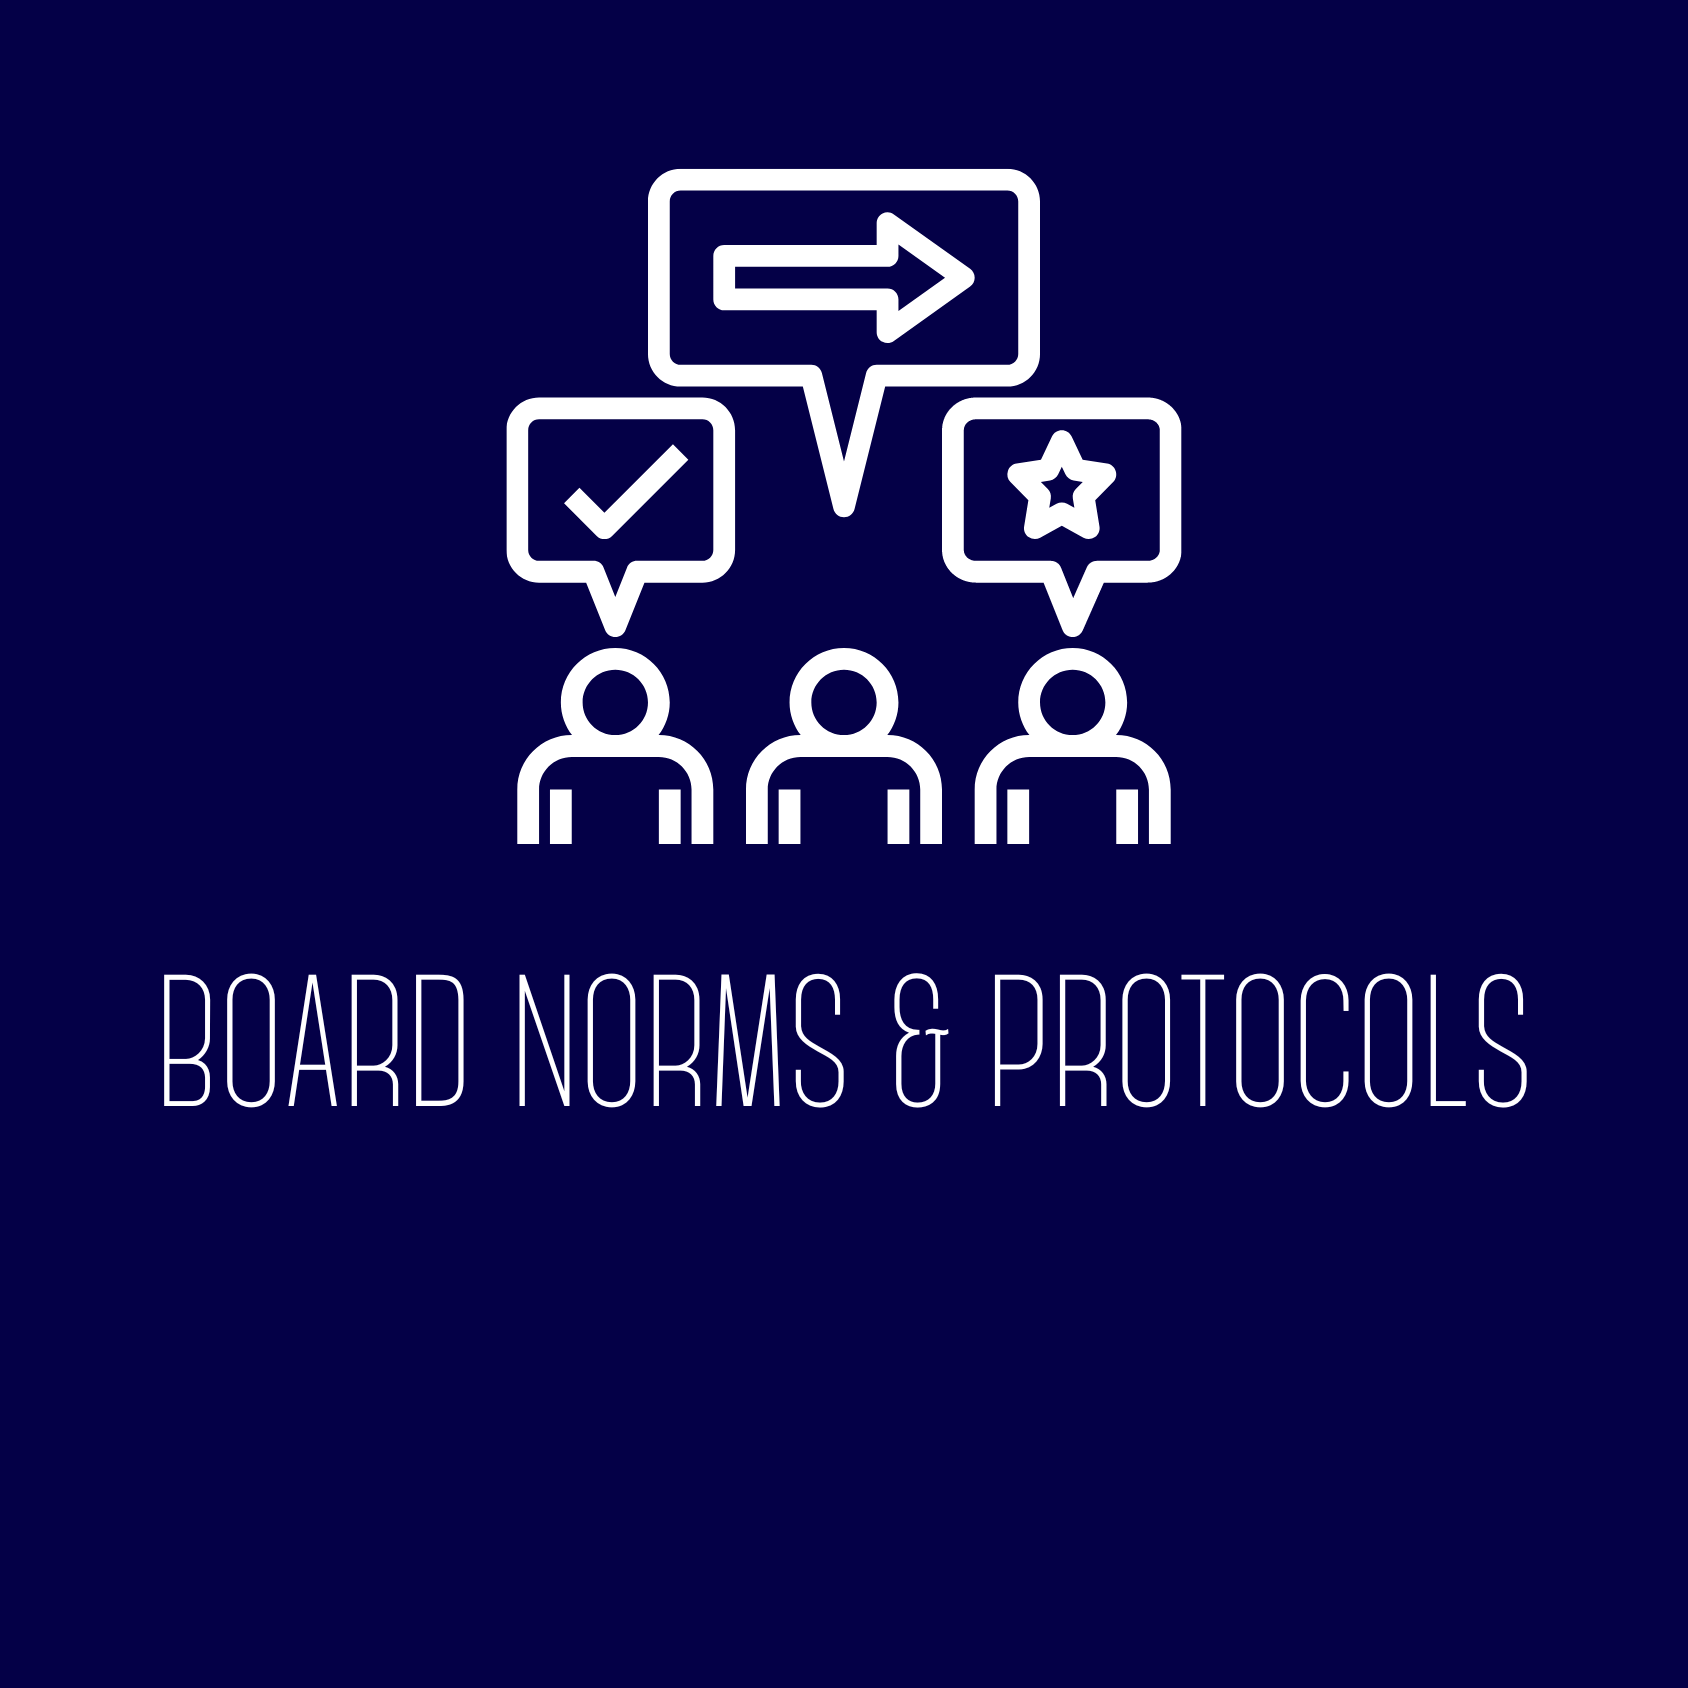 Board Norms and Protocols